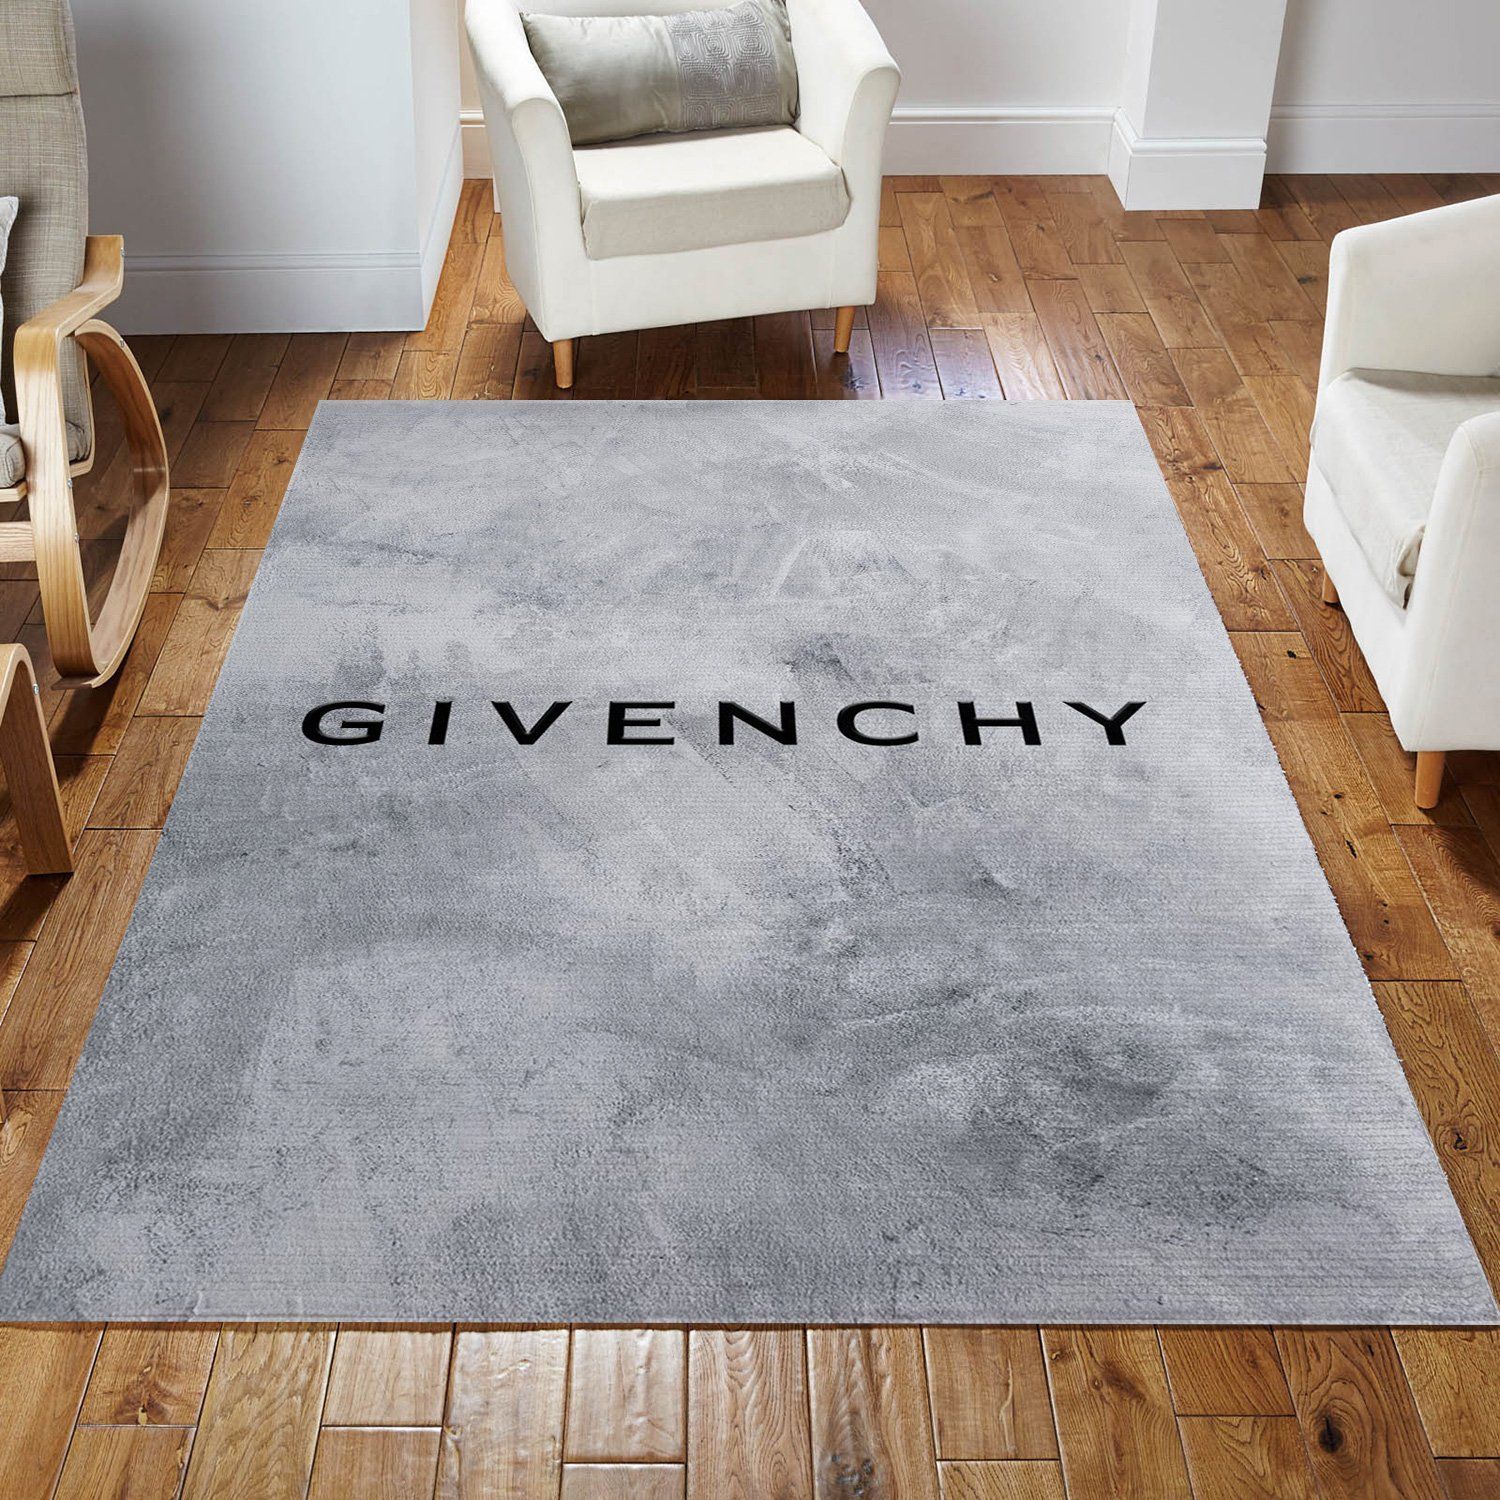 Givenchy Area Rugs Living Room Rug Christmas Gift US Decor - Indoor Outdoor Rugs 3